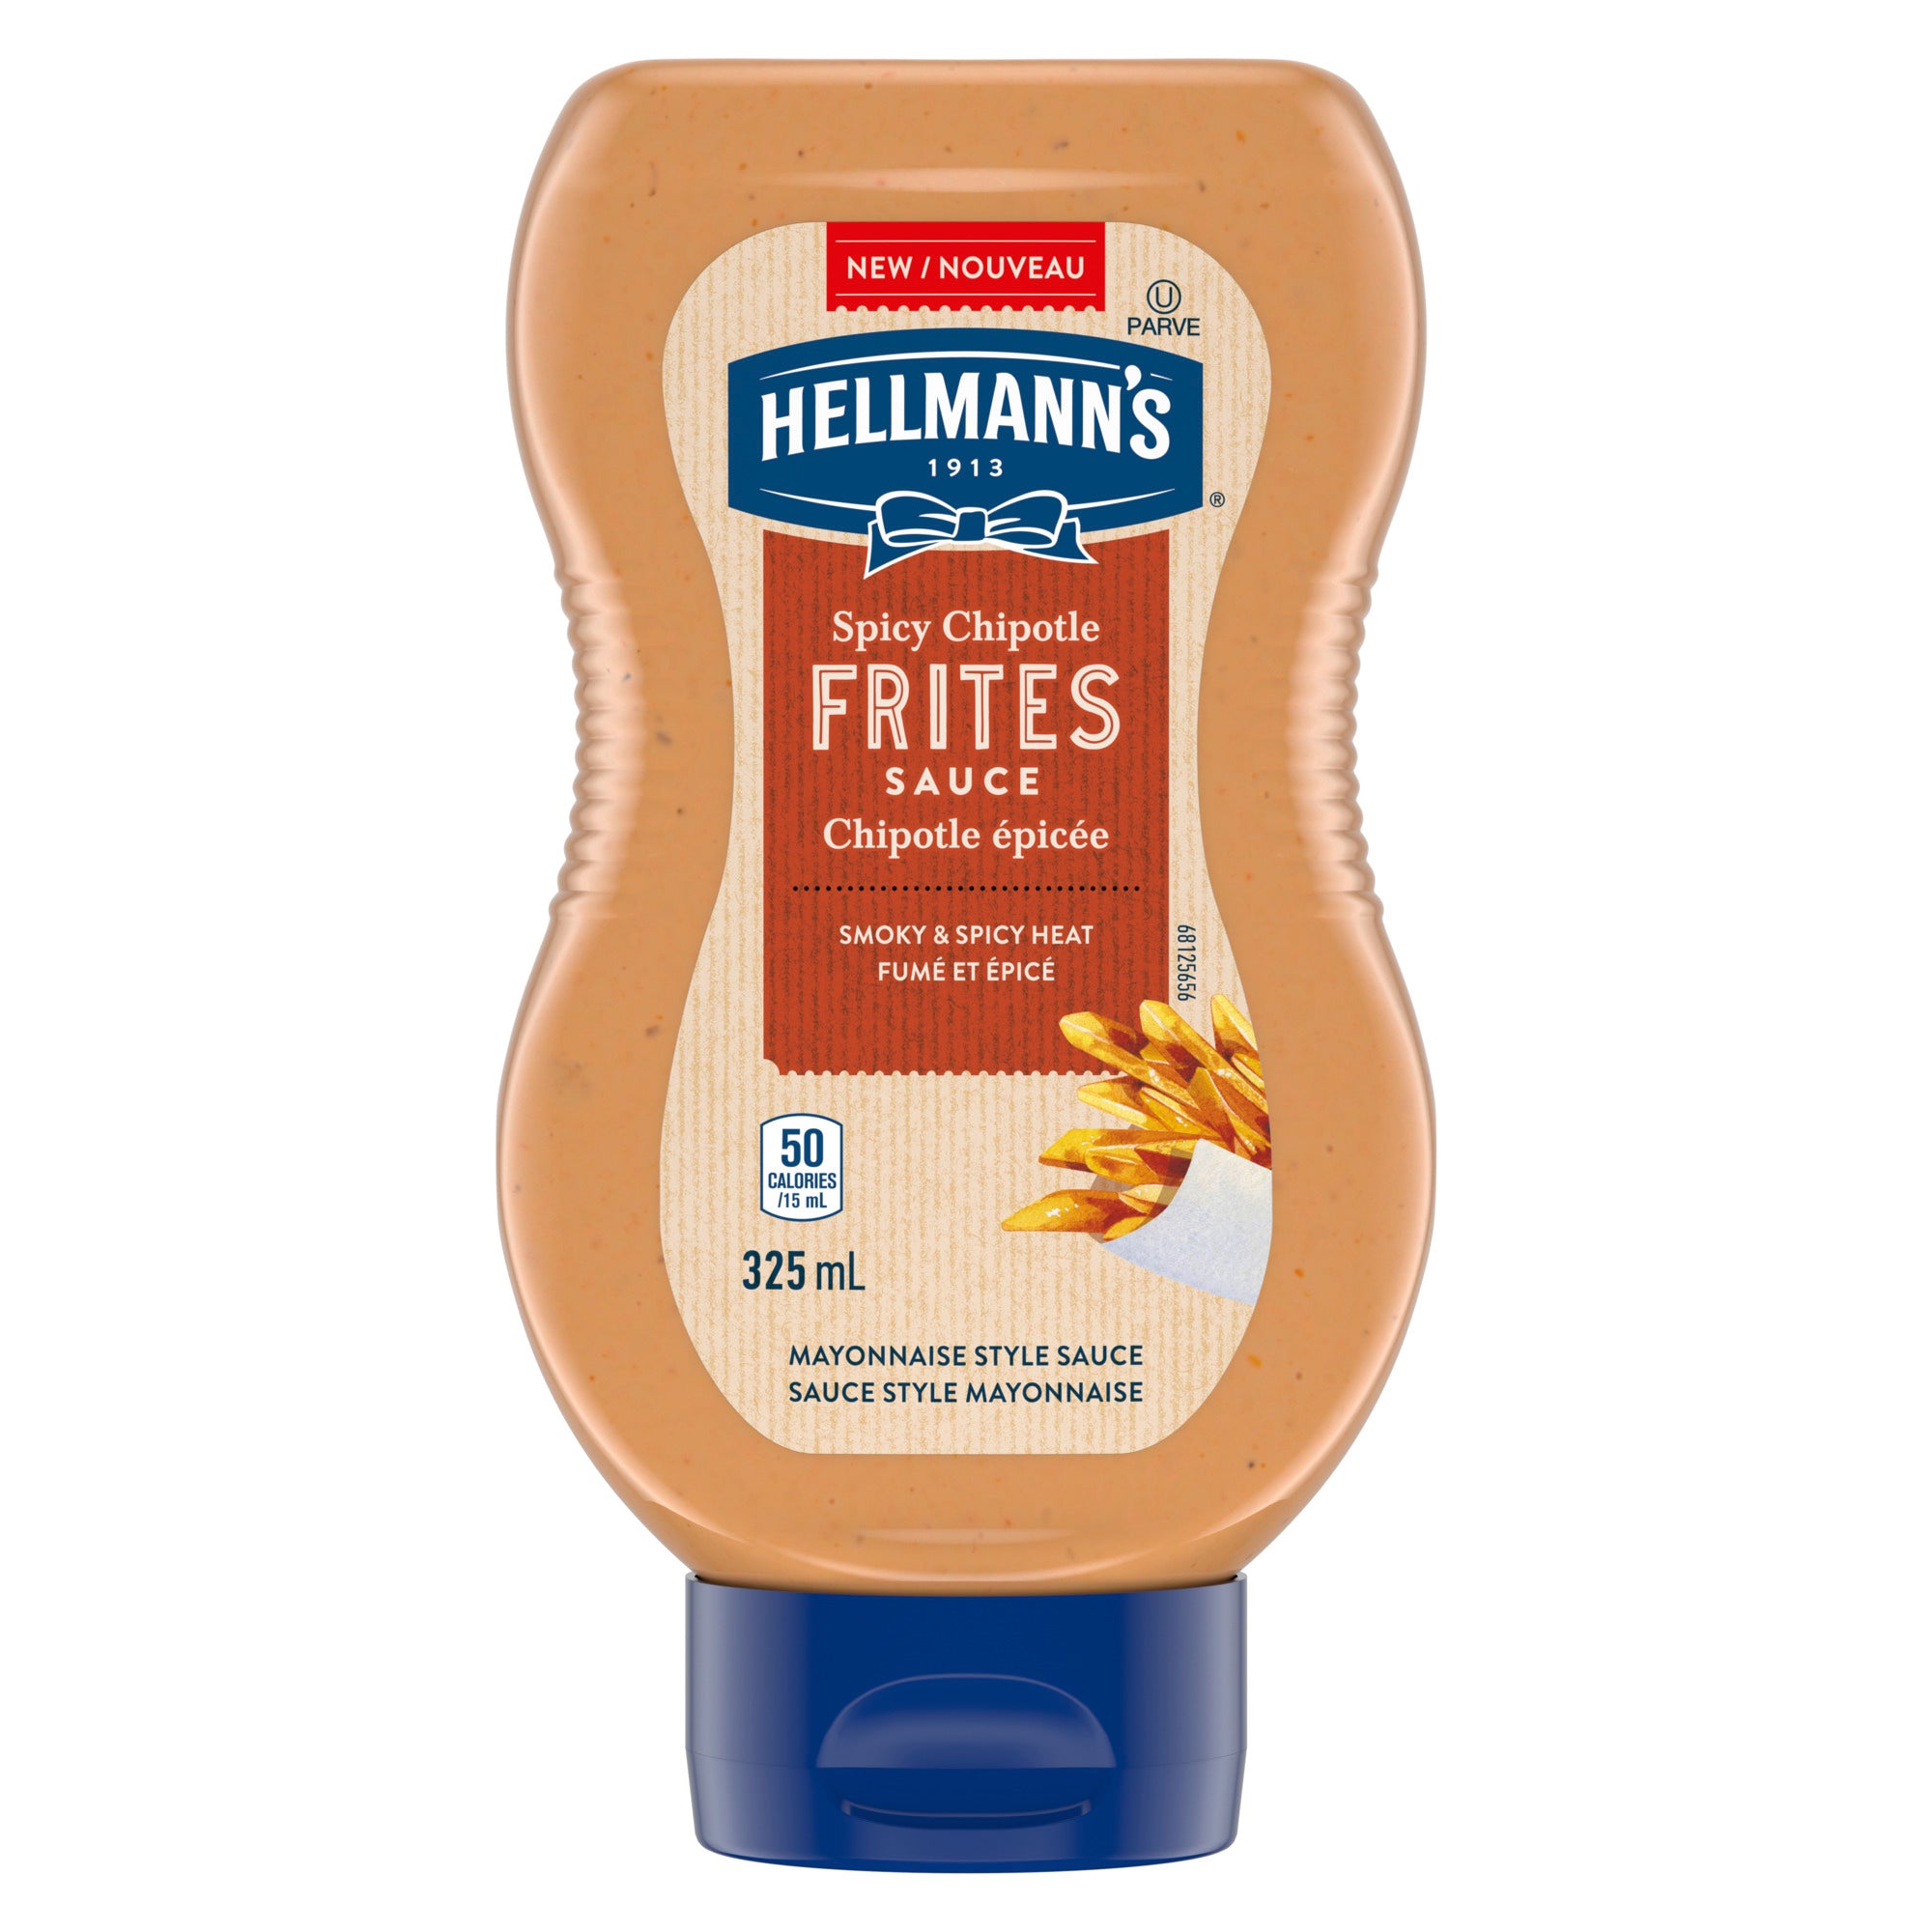 Showing the frontside view of the Hellmann's Spicy Frites 325ml product.